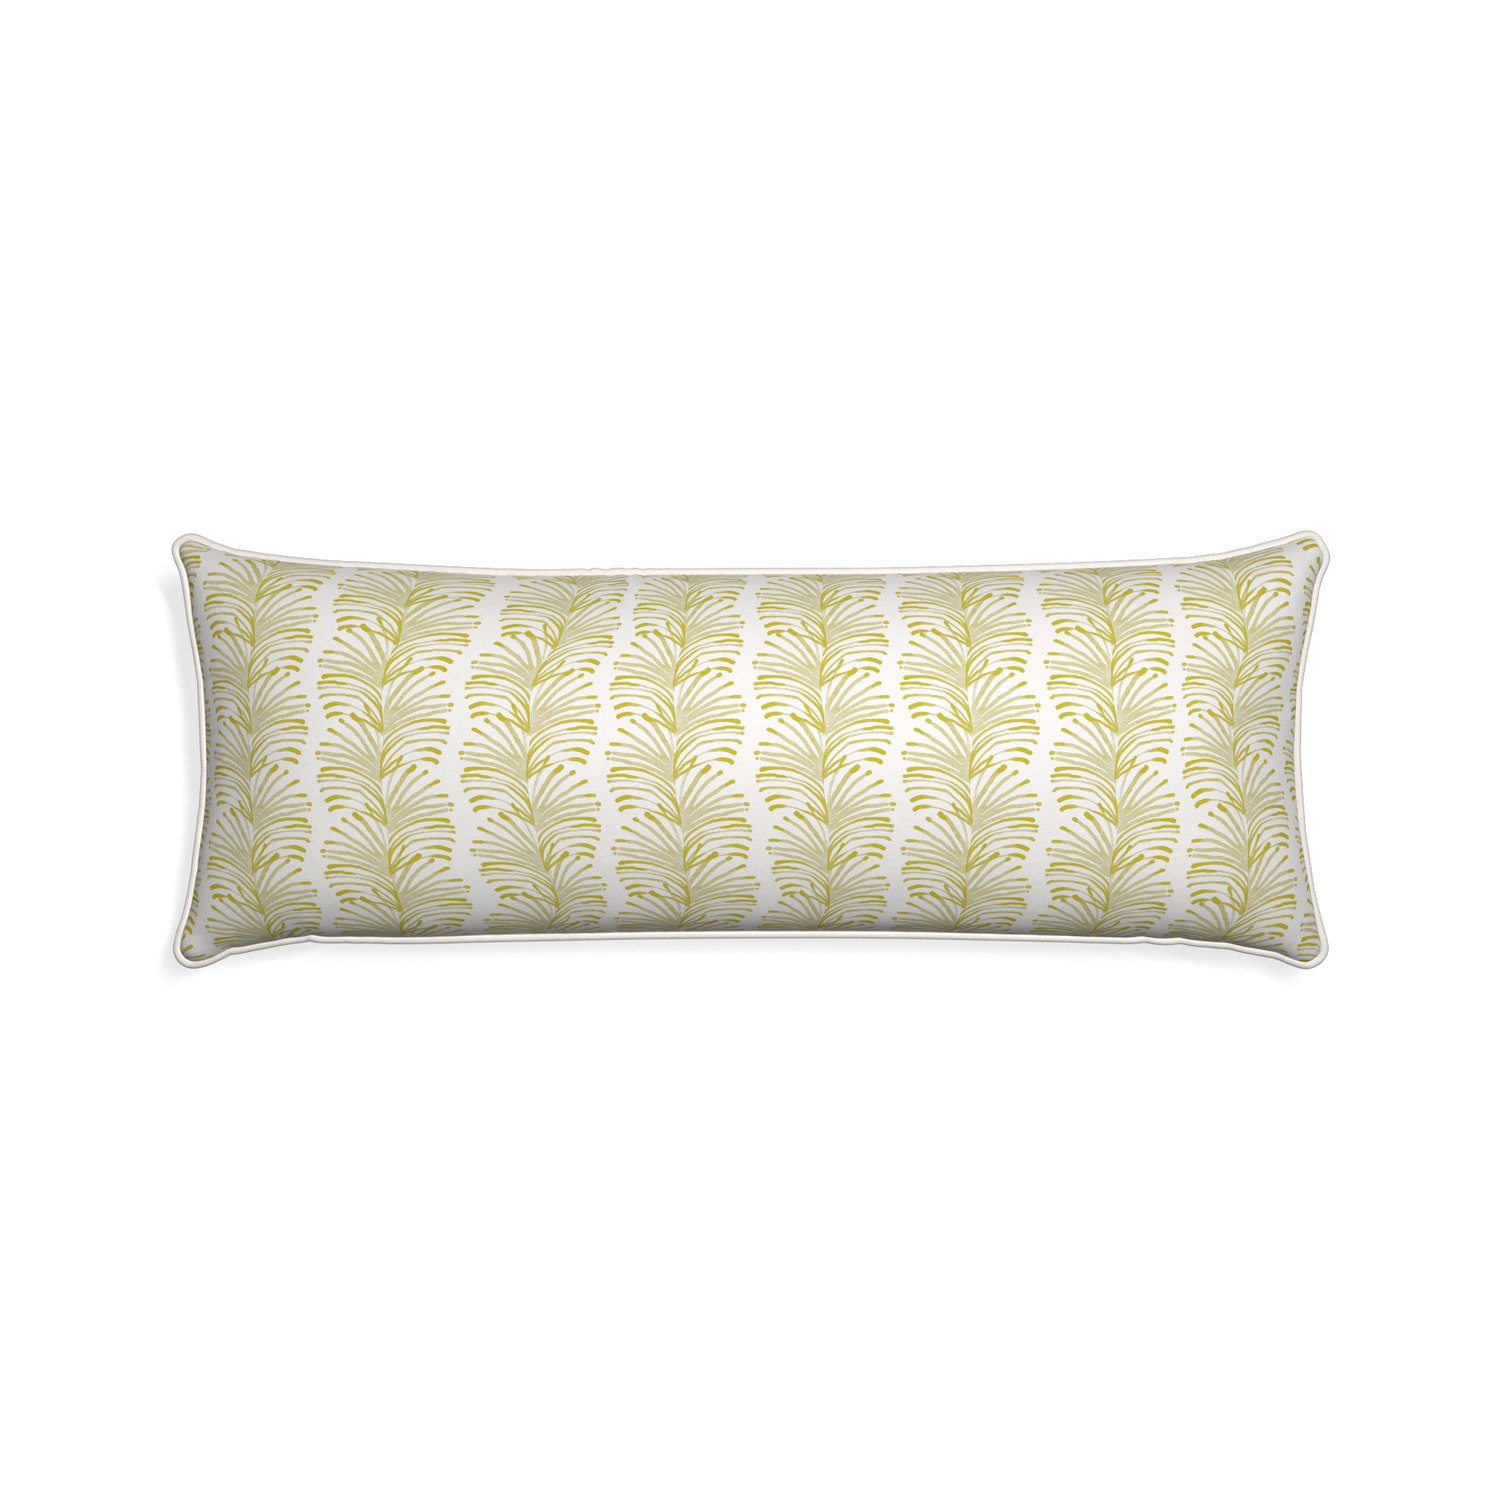 Xl-lumbar emma chartreuse custom yellow stripe chartreusepillow with snow piping on white background